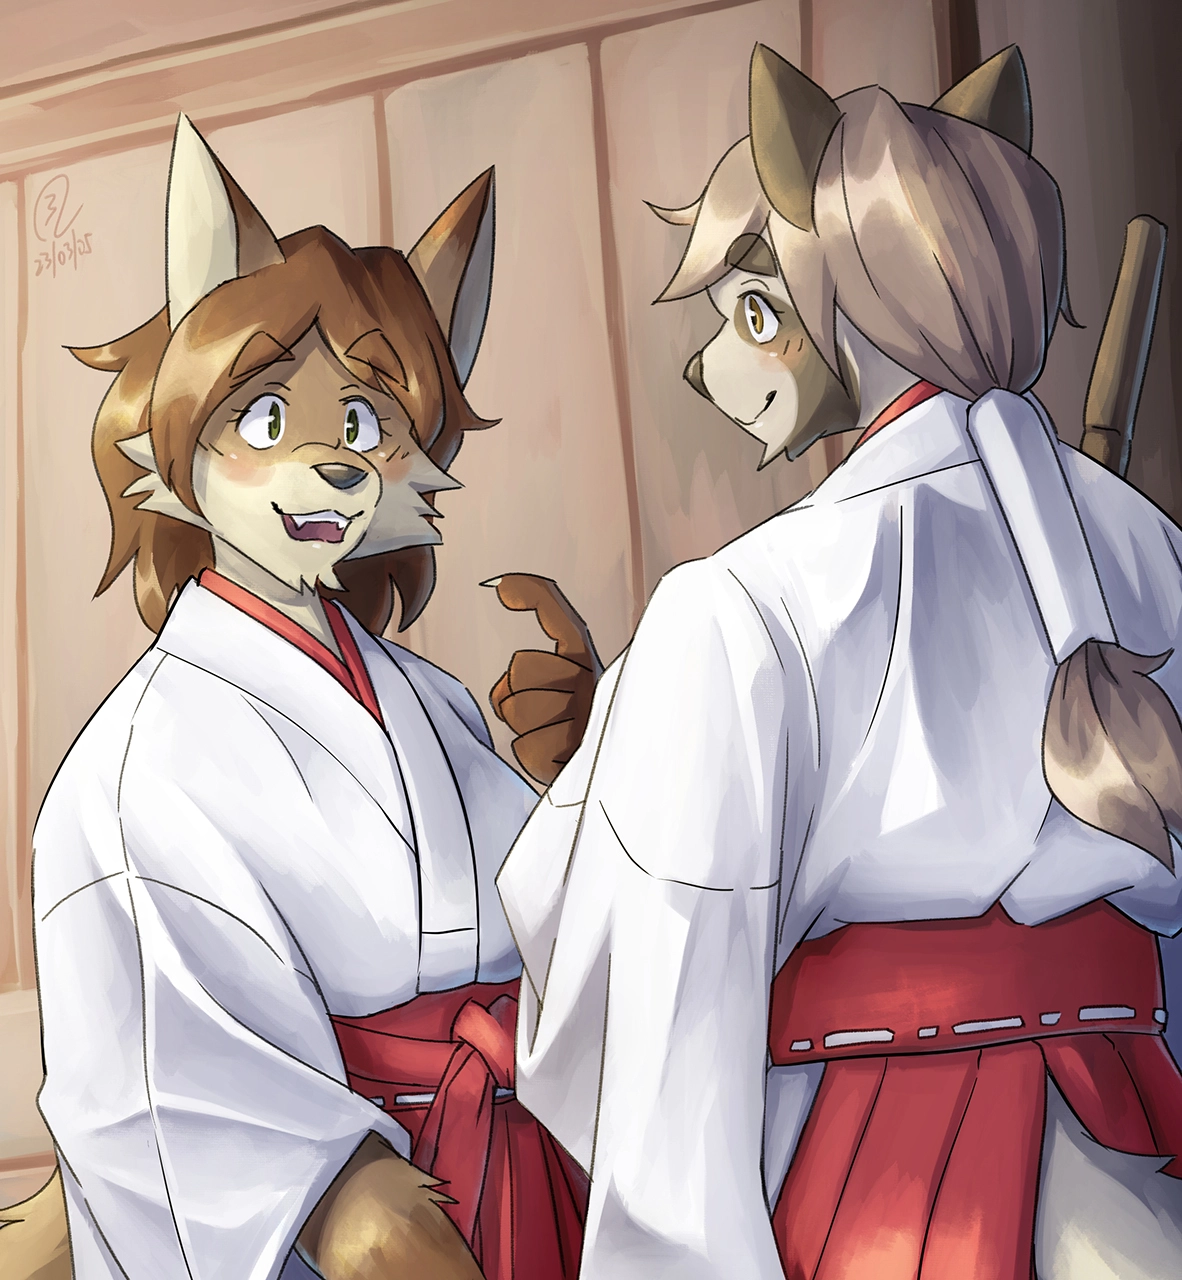 An anthropomorphic fox and an anthropomorphic Japanese raccoon dog shrine maidens are having a chat while performing duties in a Shinto shrine.